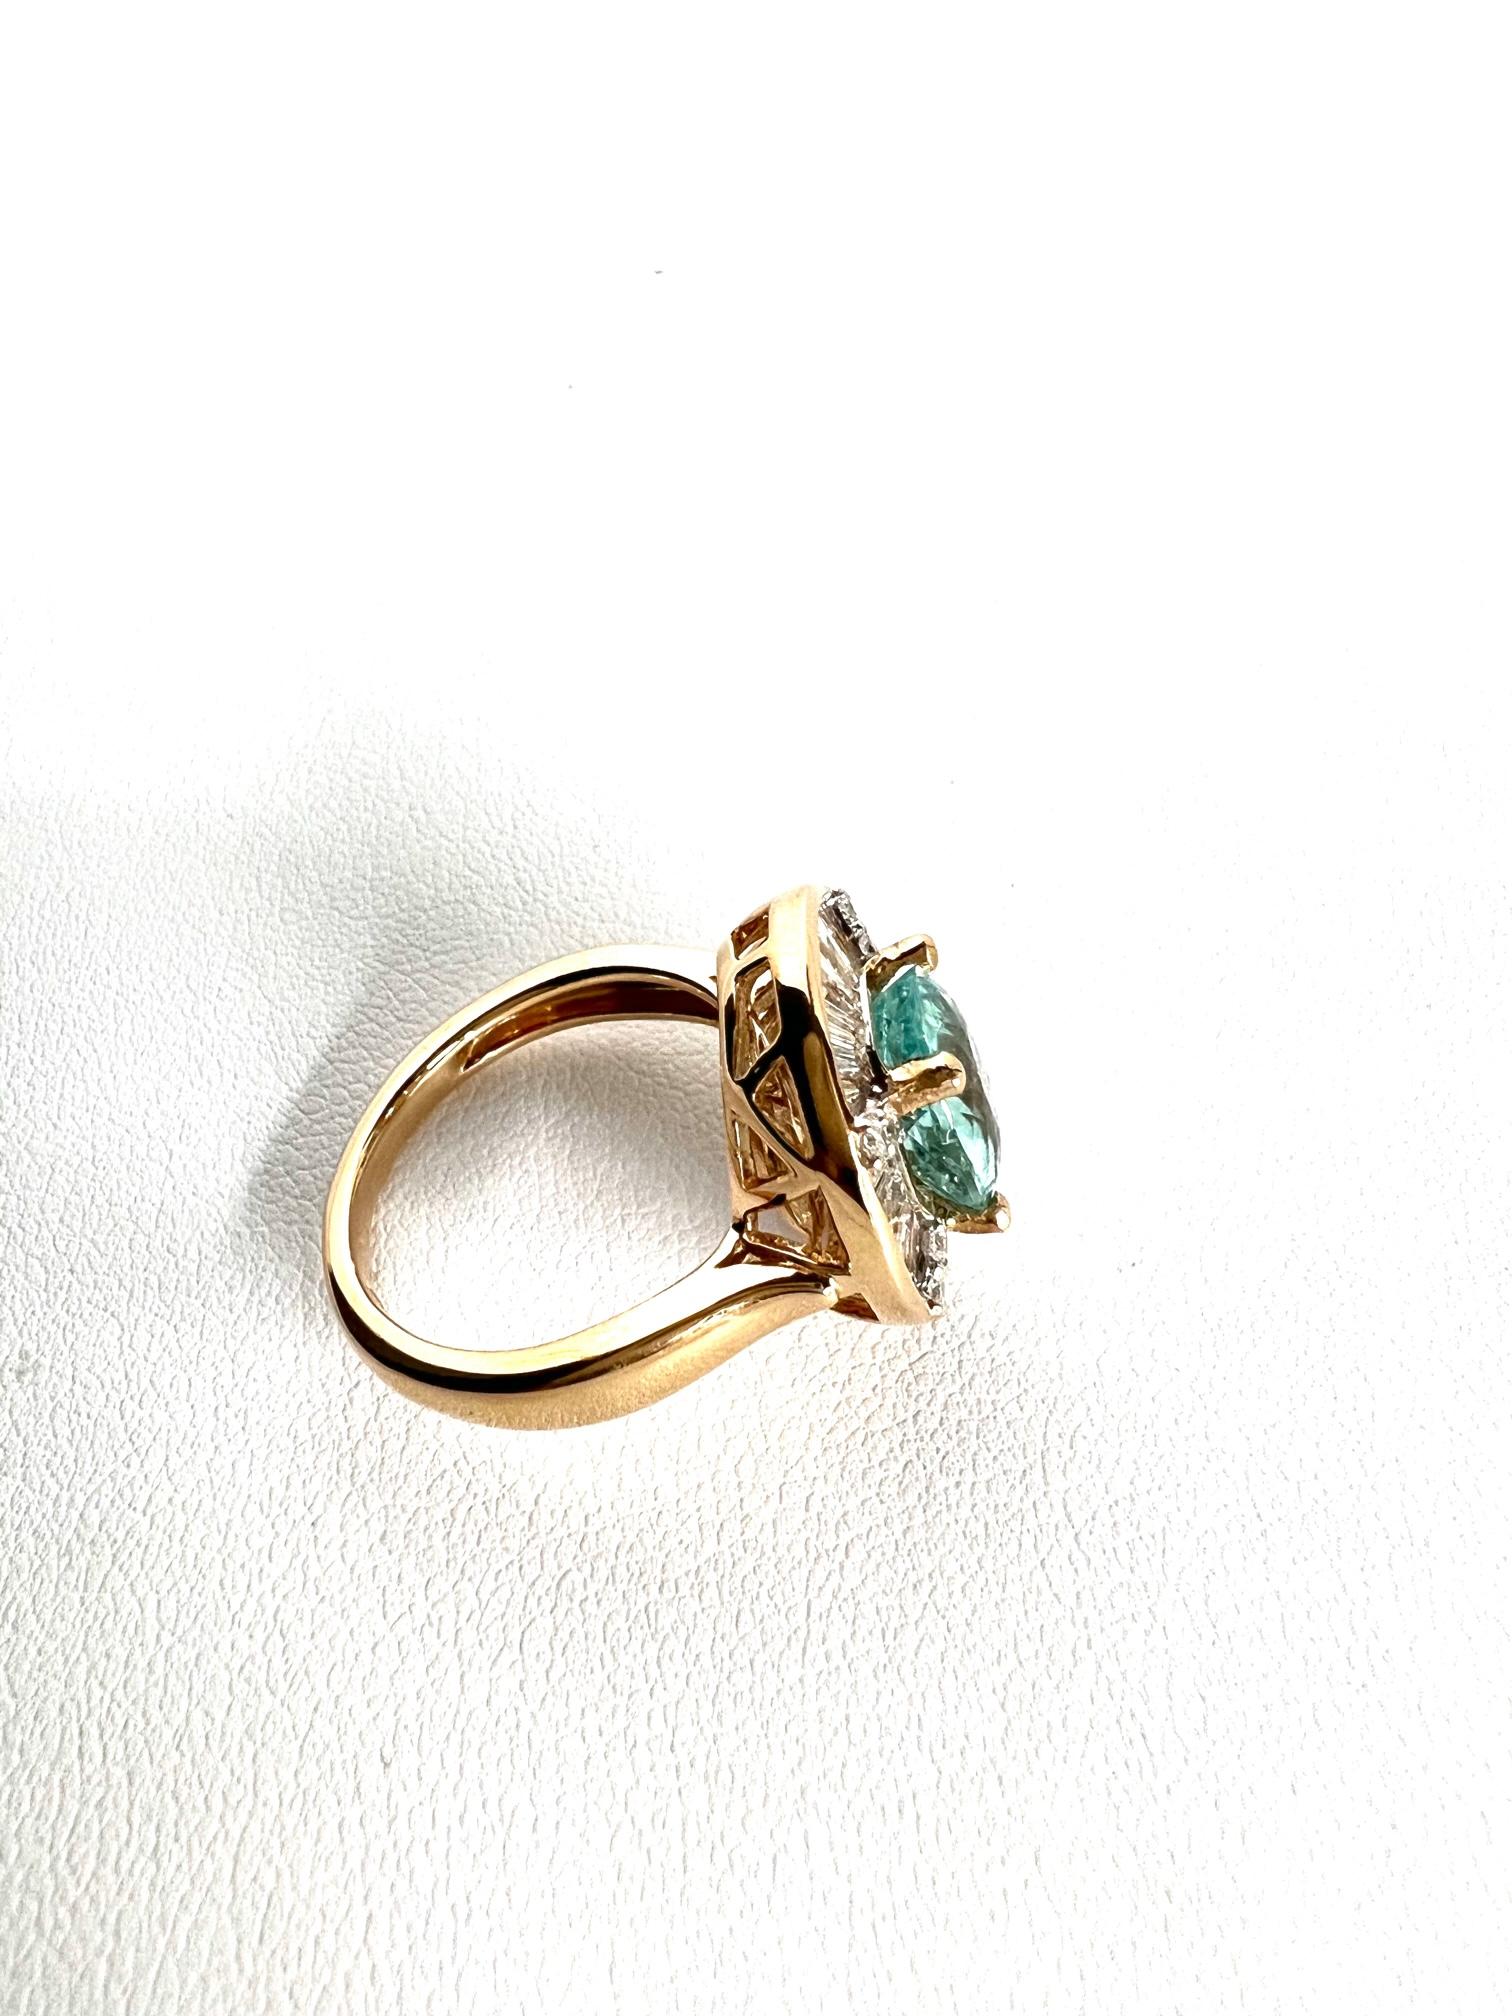 Women's Ring in 18k Red Gold with Paraiba Tourmaline and Diamonds